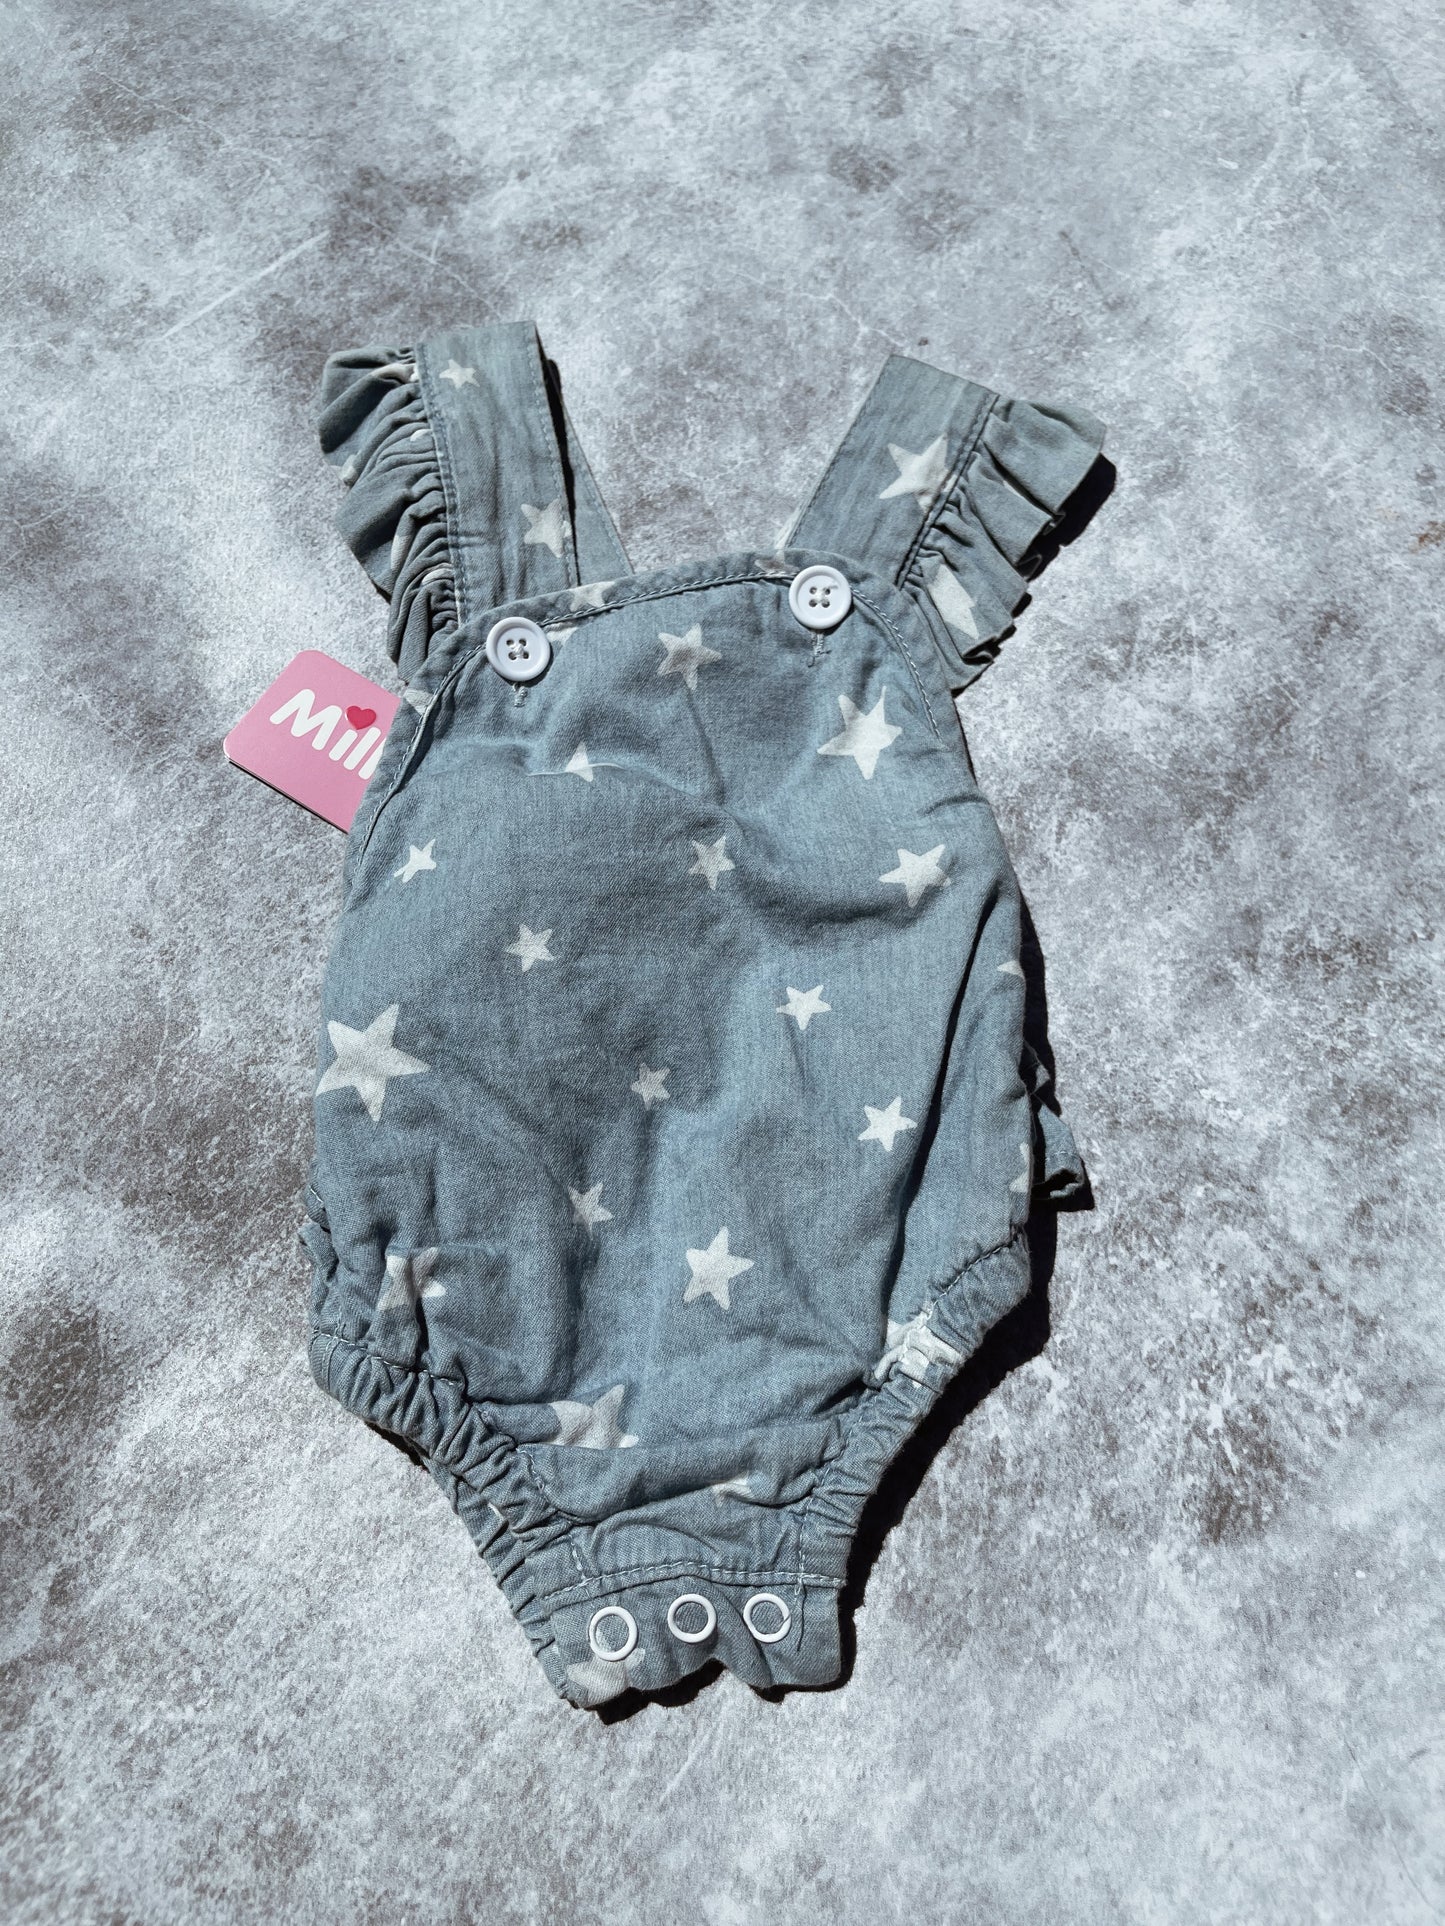 Milky - Baby Girl Chambray Playsuit